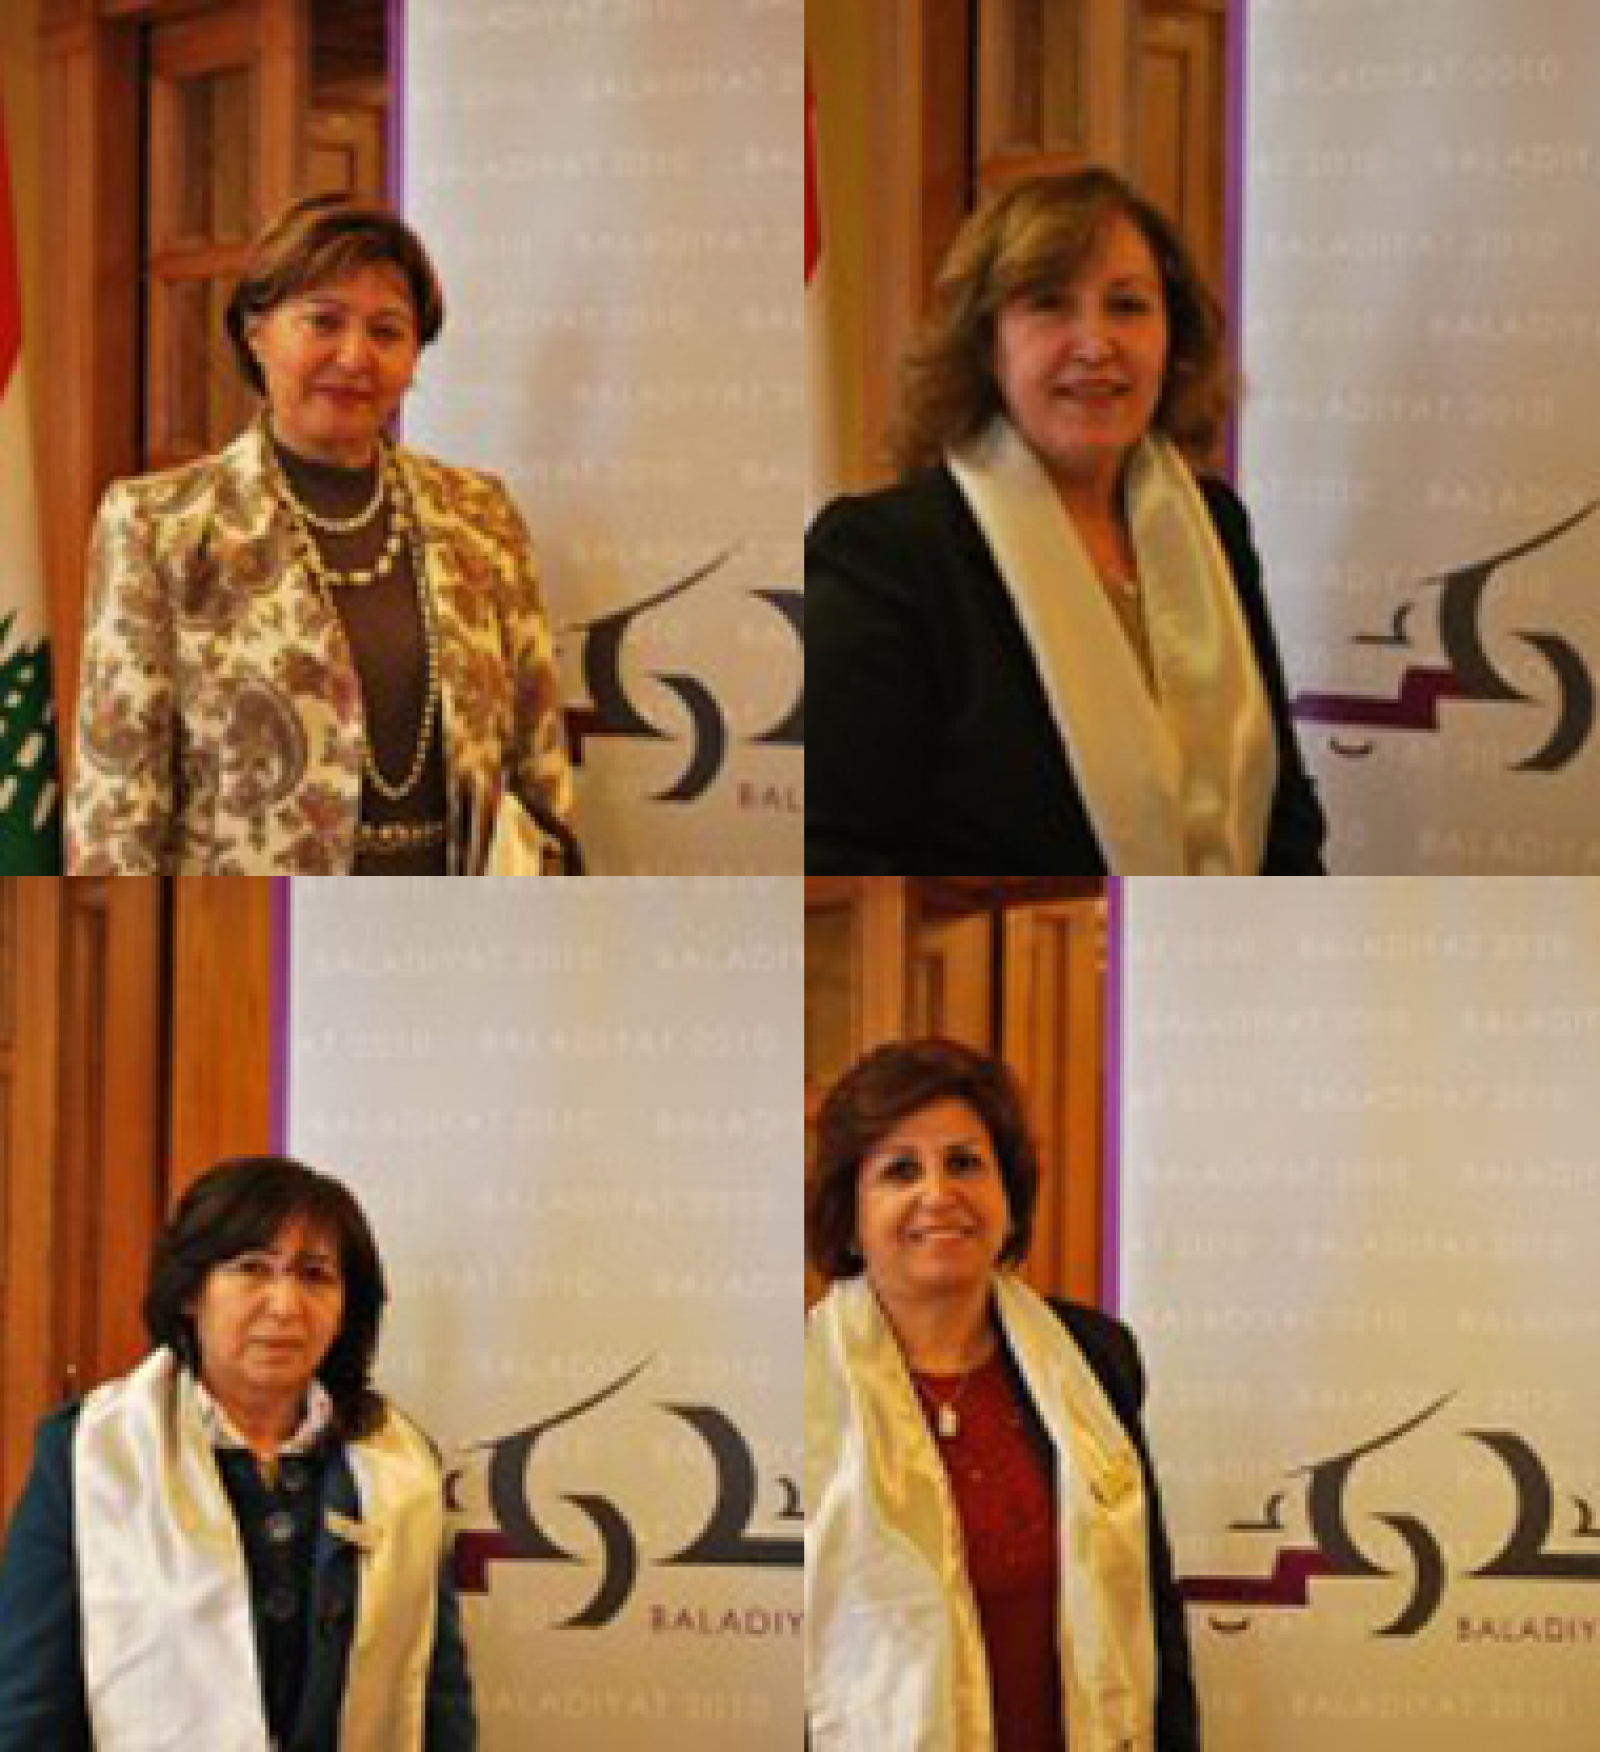 Women Gain the Confidence, Skills and Network to Win Elections in Lebanon